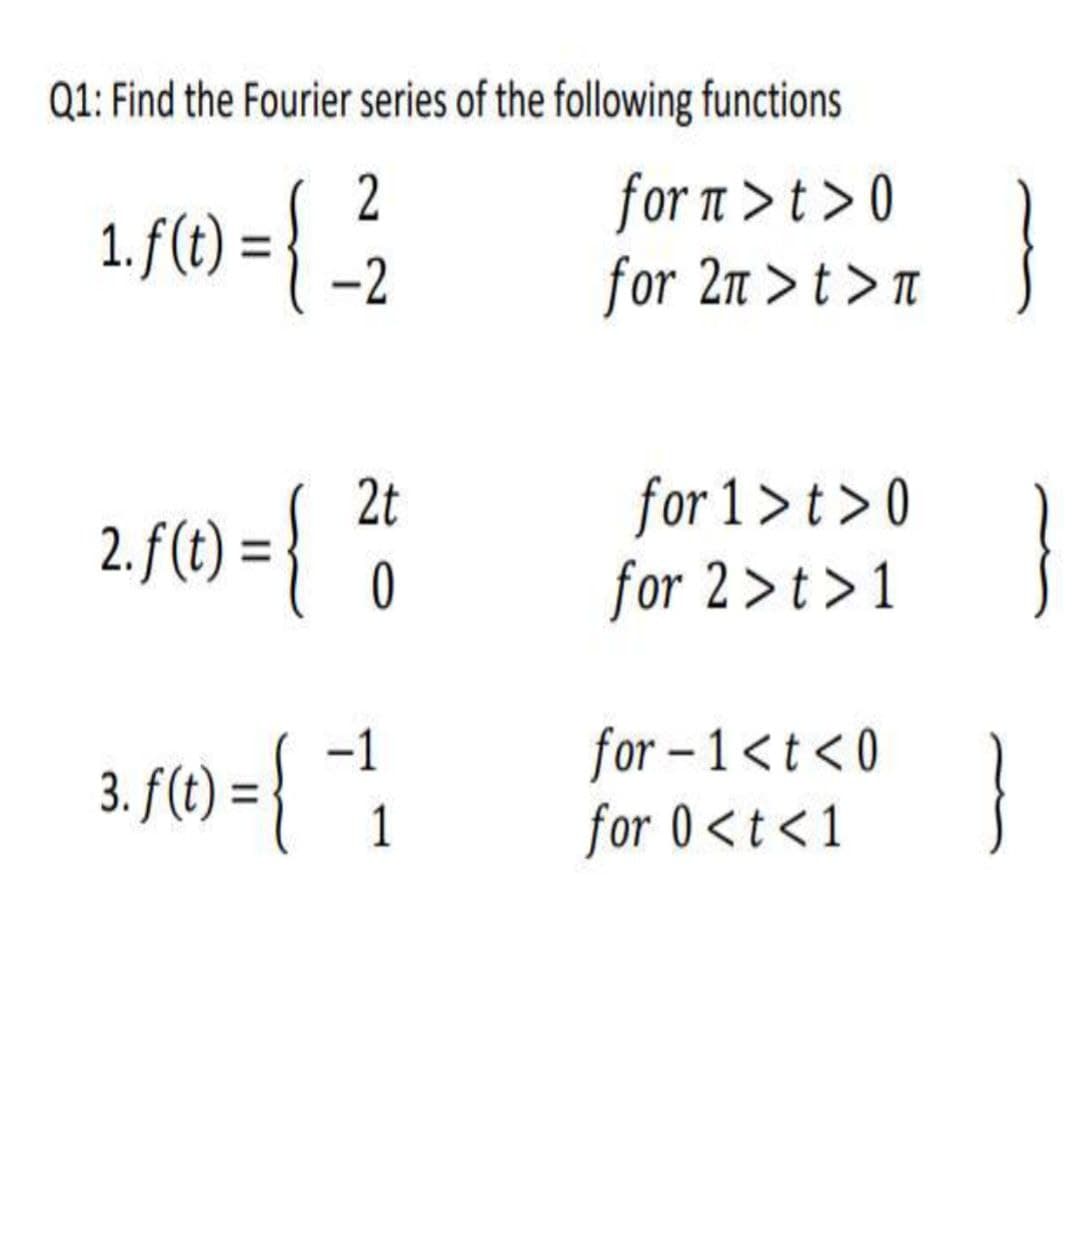 Q1: Find the Fourier series of the following functions
form>t> 0
₁. ƒ (0) = { ²/₁2
1
for 2n>t>n
2t
2. f (t) = { 0
3. f(t) = { 1
for 1>t>0
for 2 > t > 1
for-1<t<0
for 0<t<1
}